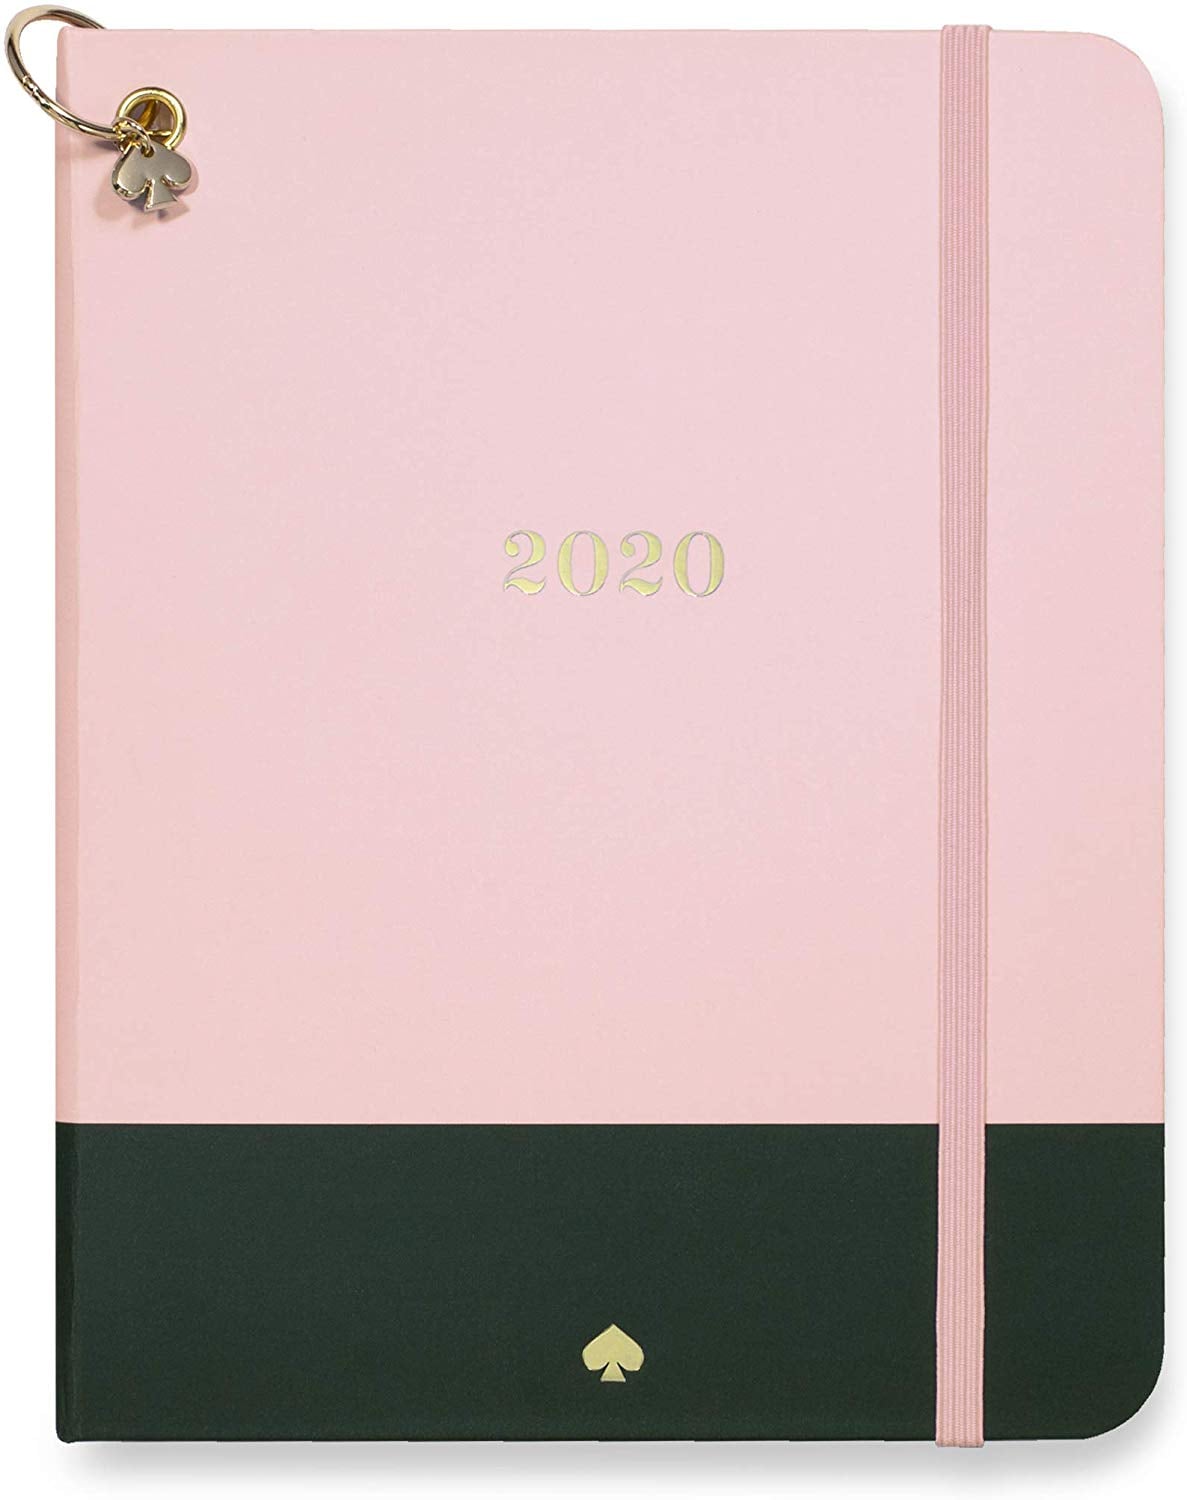 Kate Spade New York 12 Month Medium Hardcover Annual Planner 2020 | Shhh .  . . Amazon Has a Secret Section Filled With Kate Spade Goodies, Perfect For  Gifting | POPSUGAR Fashion Photo 82